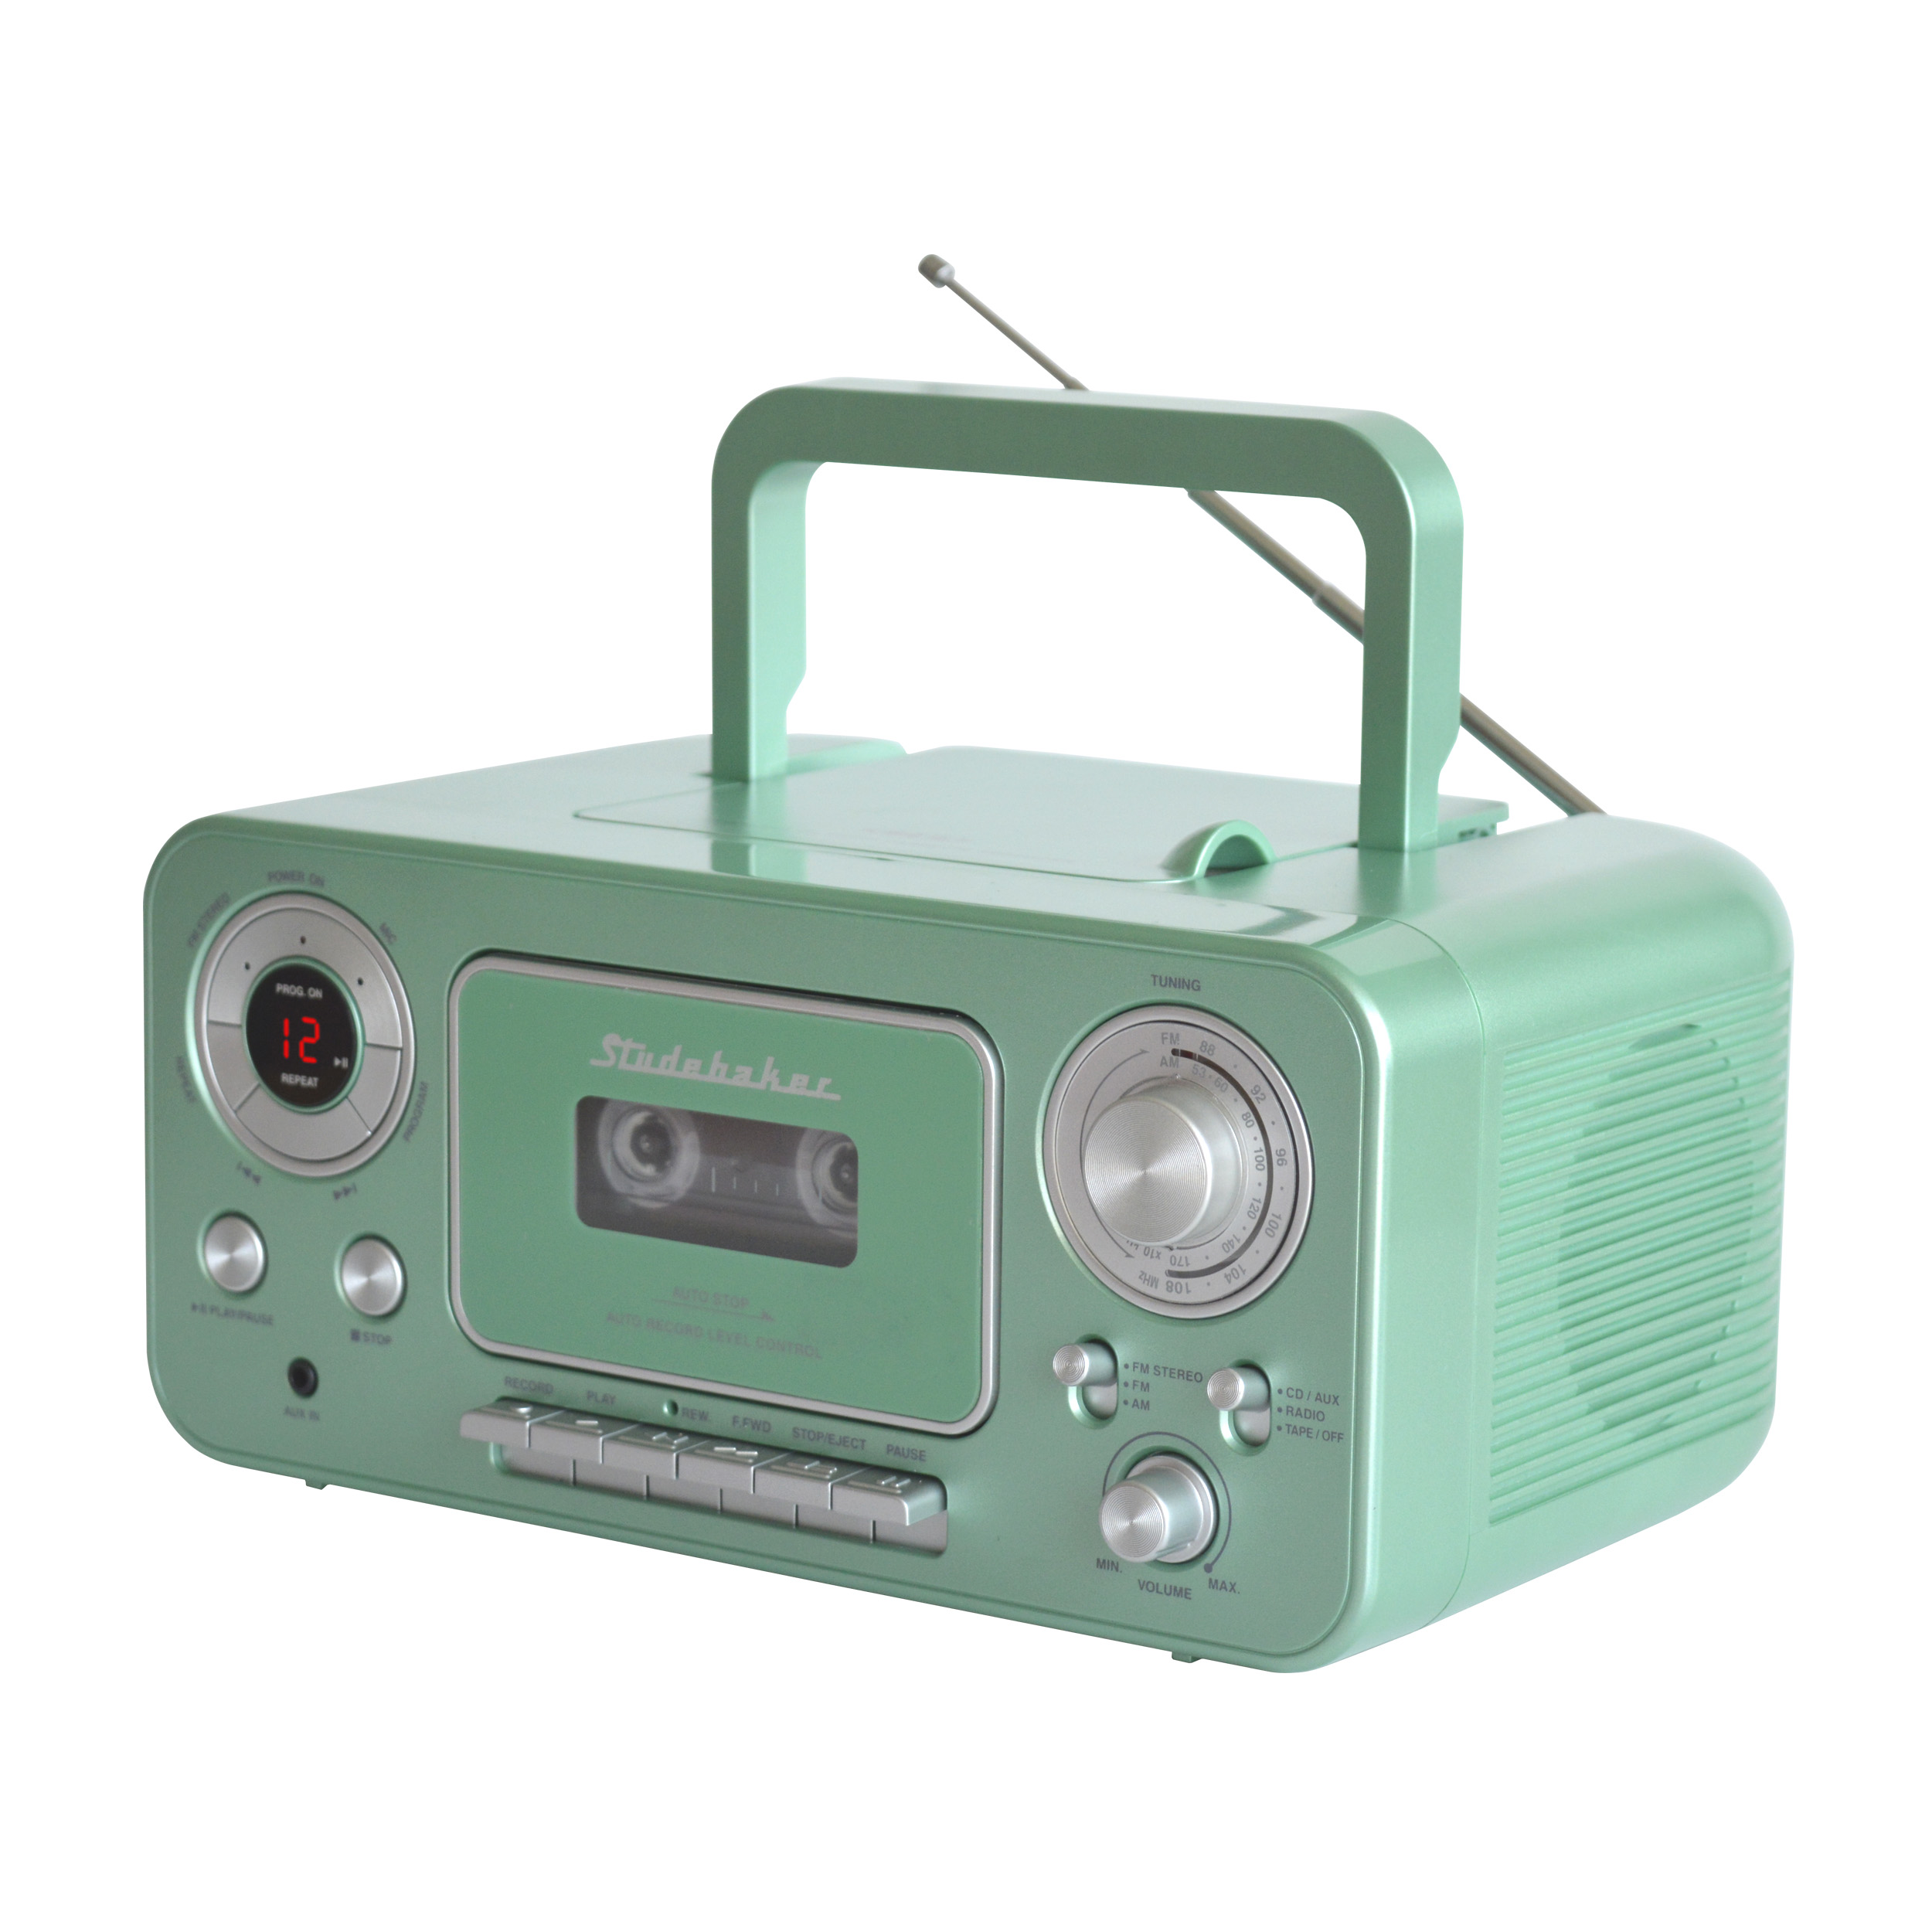 Portable Stereo CD Player with AM/FM Radio and Cassette Player/Recorder - image 3 of 5